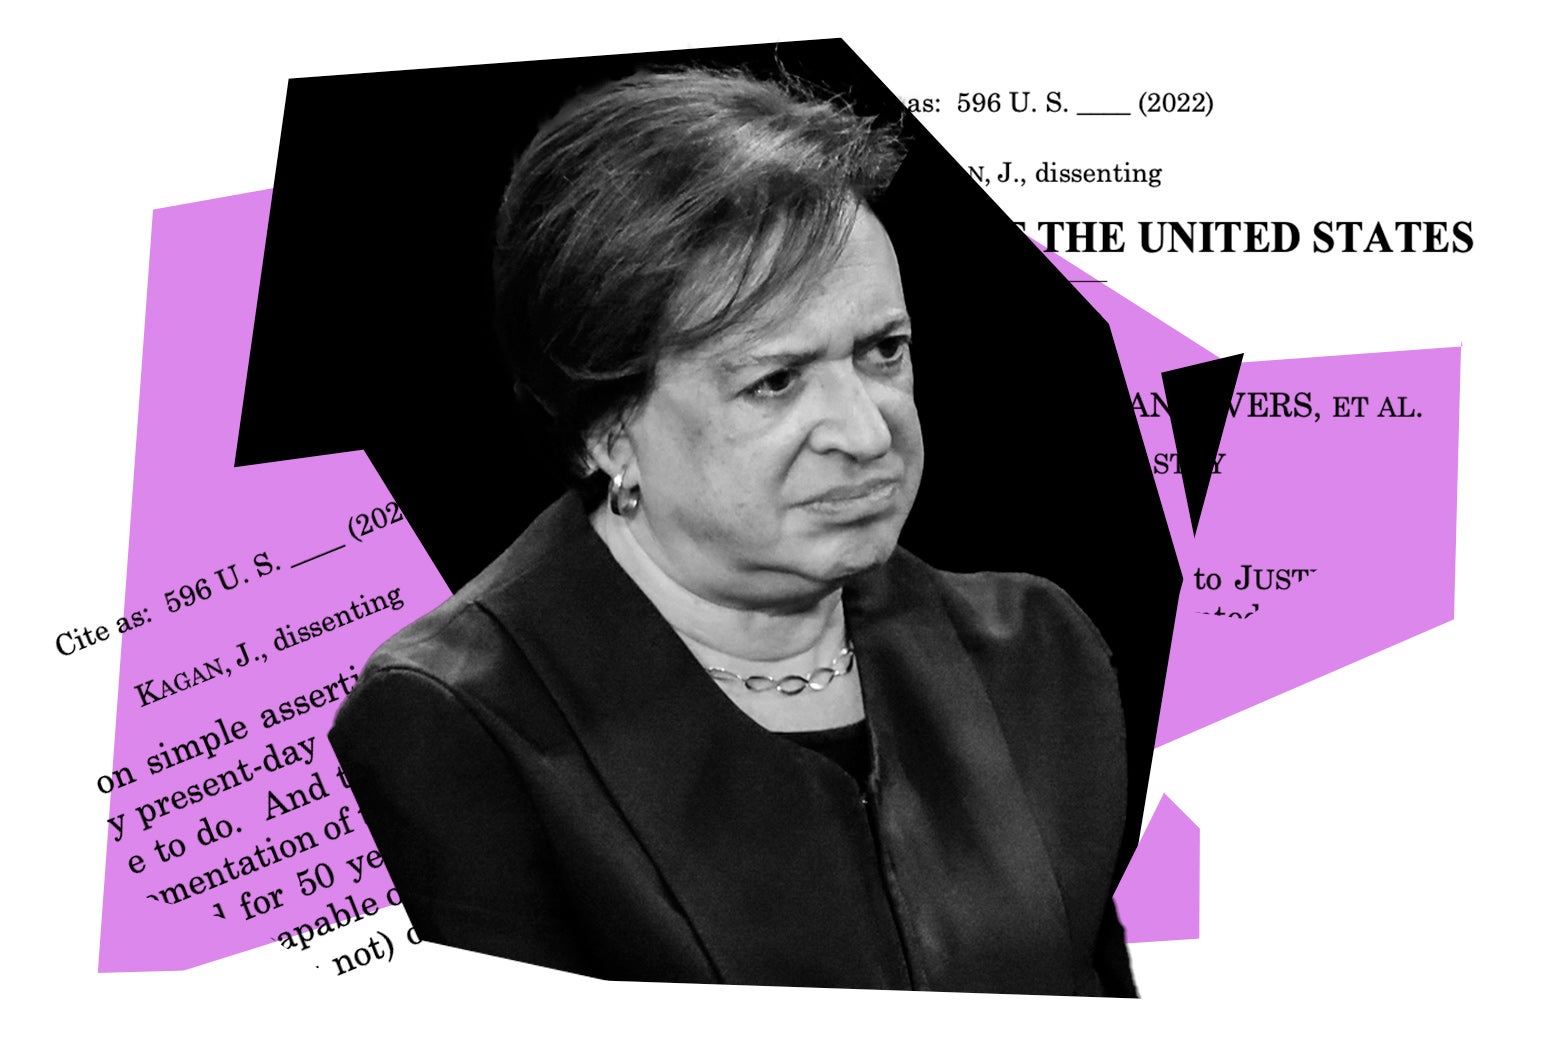 Kagan in her robe, frowning, with Supreme Court opinion text superimposed behind her.